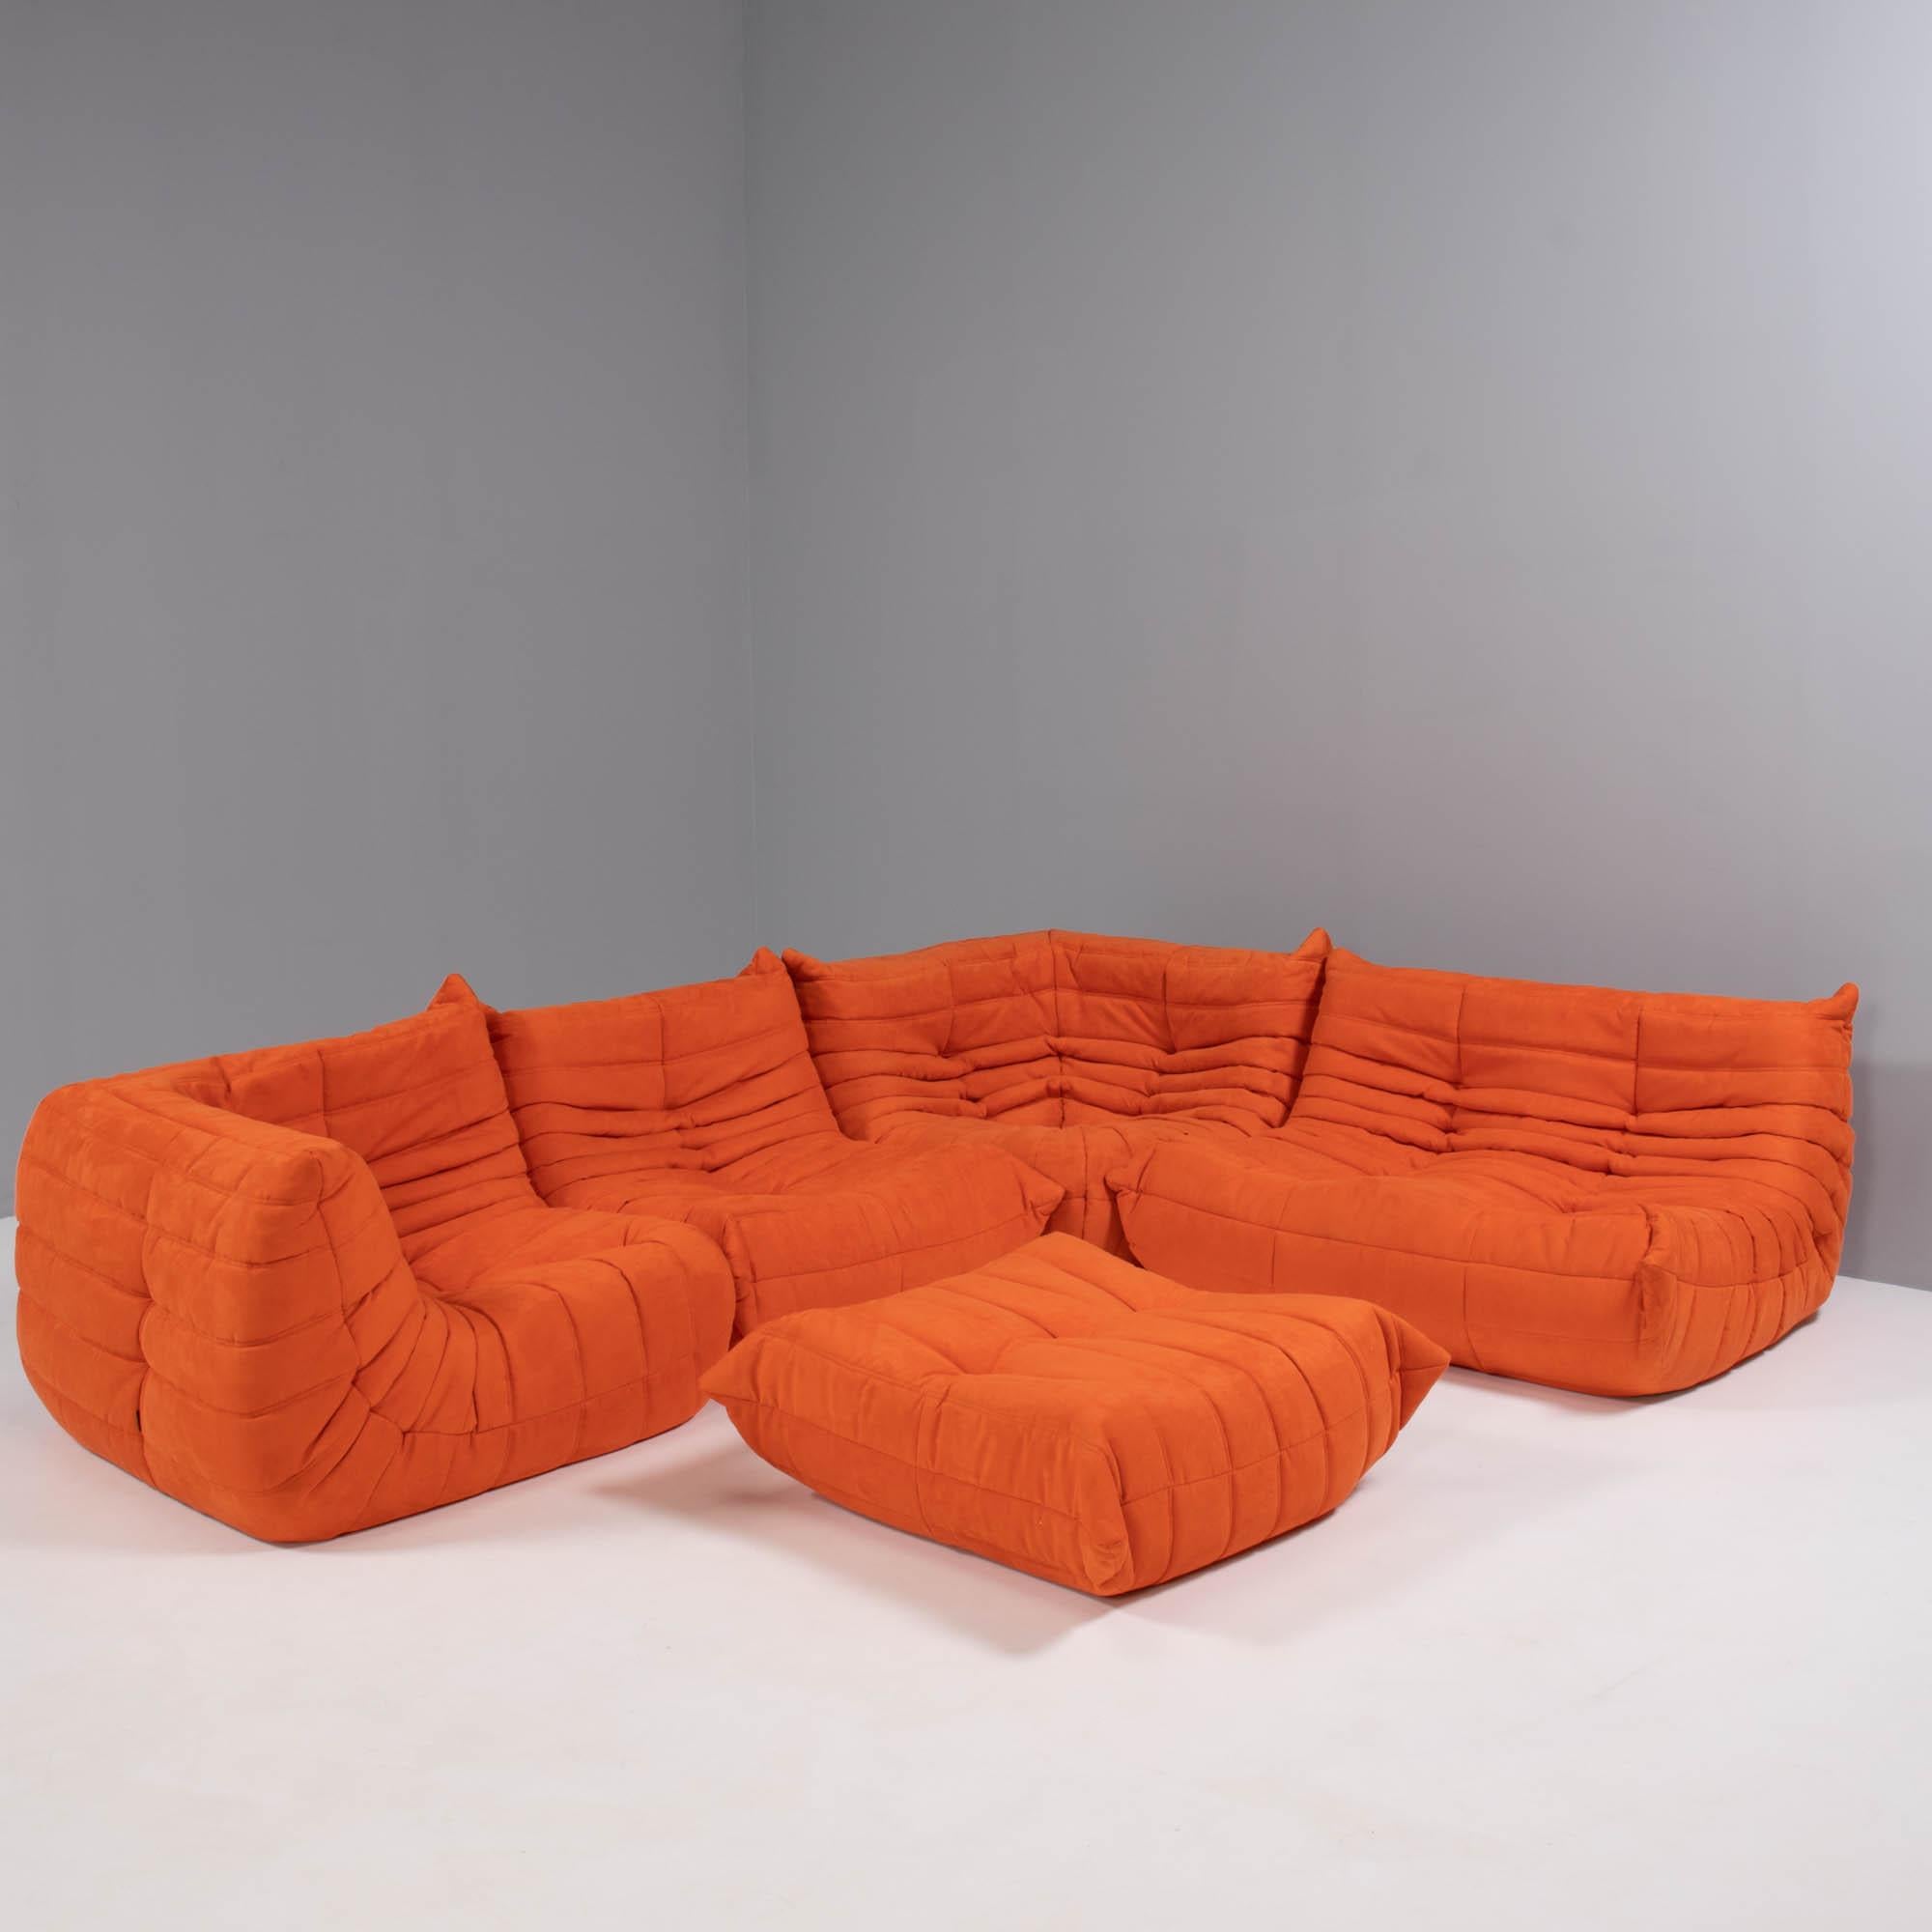 The iconic Togo sofa, originally designed by Michel Ducaroy for Ligne Roset in 1973 has become a design Classic.

This five-piece modular set is incredibly versatile and can be configured into one large corner sofa or split for a multitude of